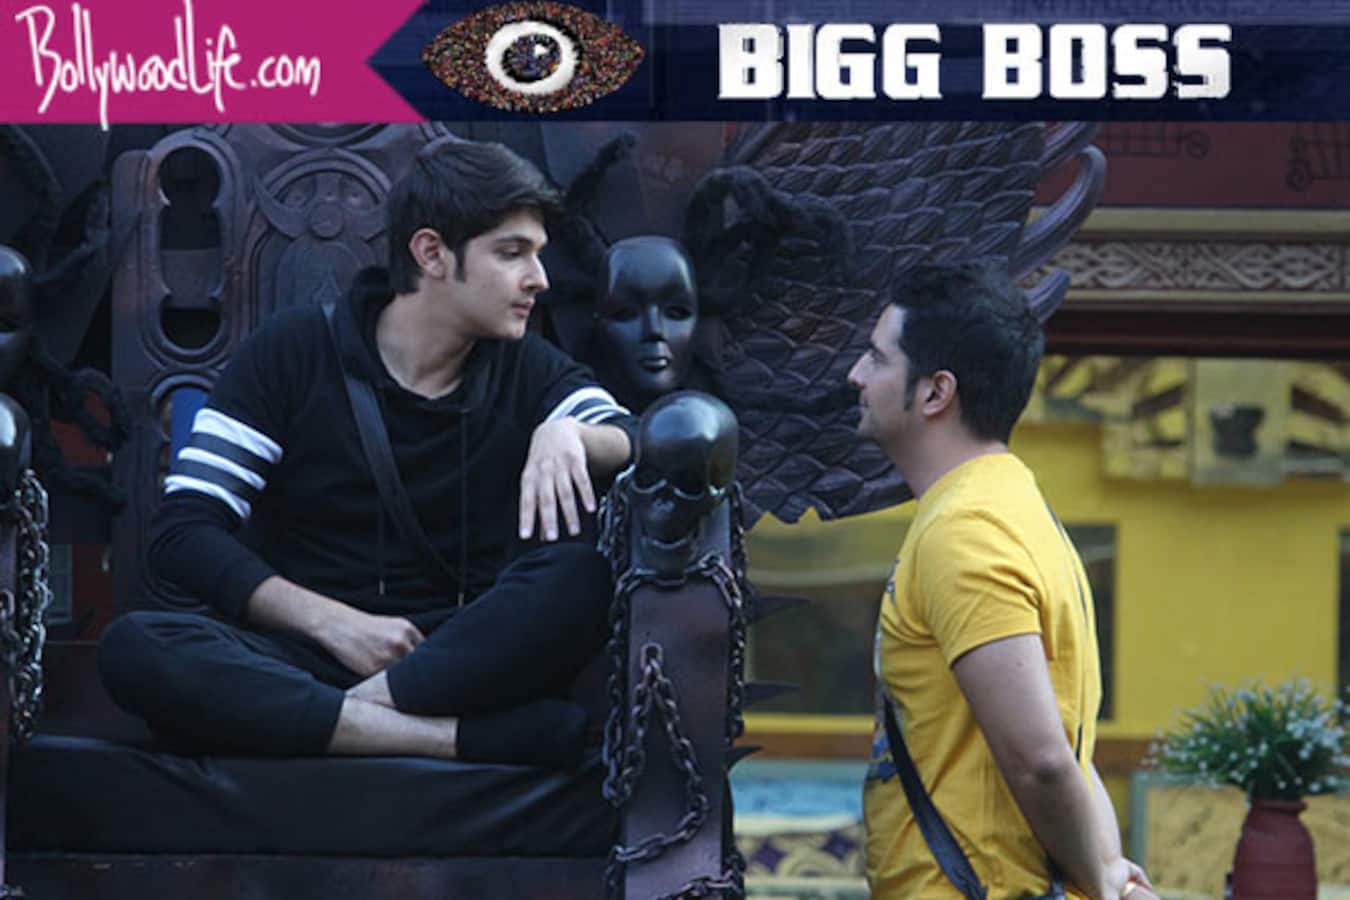 Bigg Boss 10 7th November 2016 Episode 23 Om Swami turns off with his disgusting Bani J and Karan Mehra win hearts - Bollywood News & Gossip, Movie Reviews, Trailers